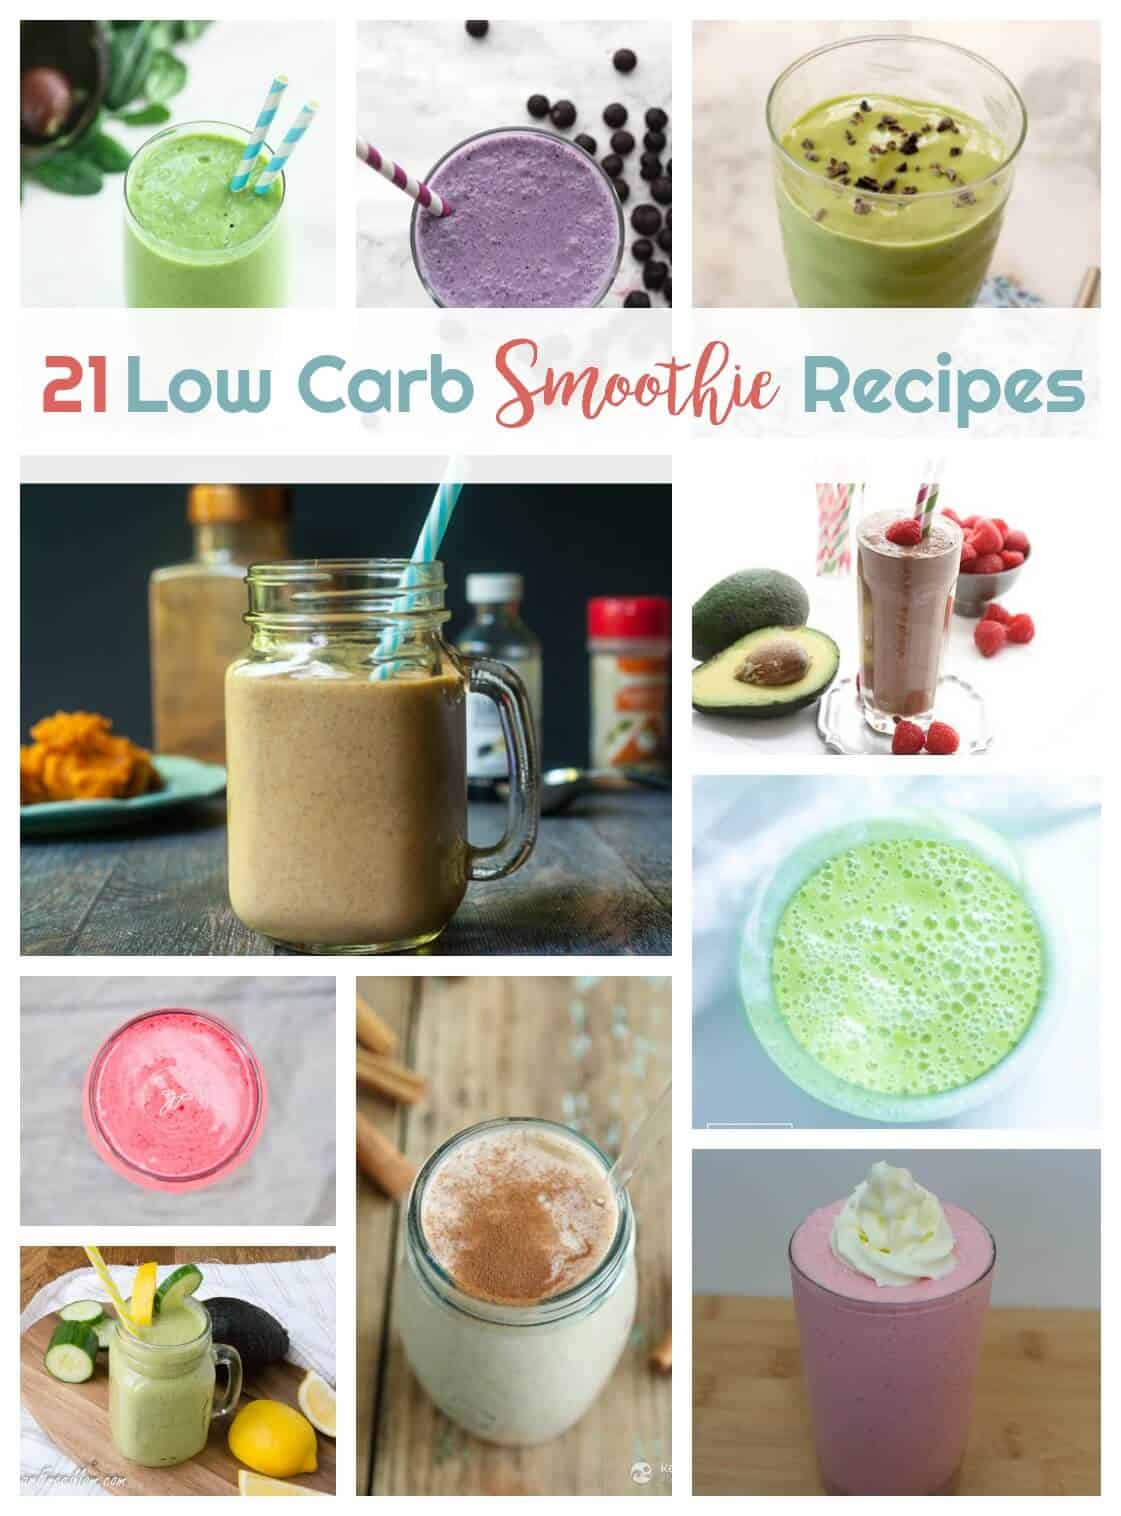 21 Low Carb Smoothie Recipes | Healthy Living in Body and Mind